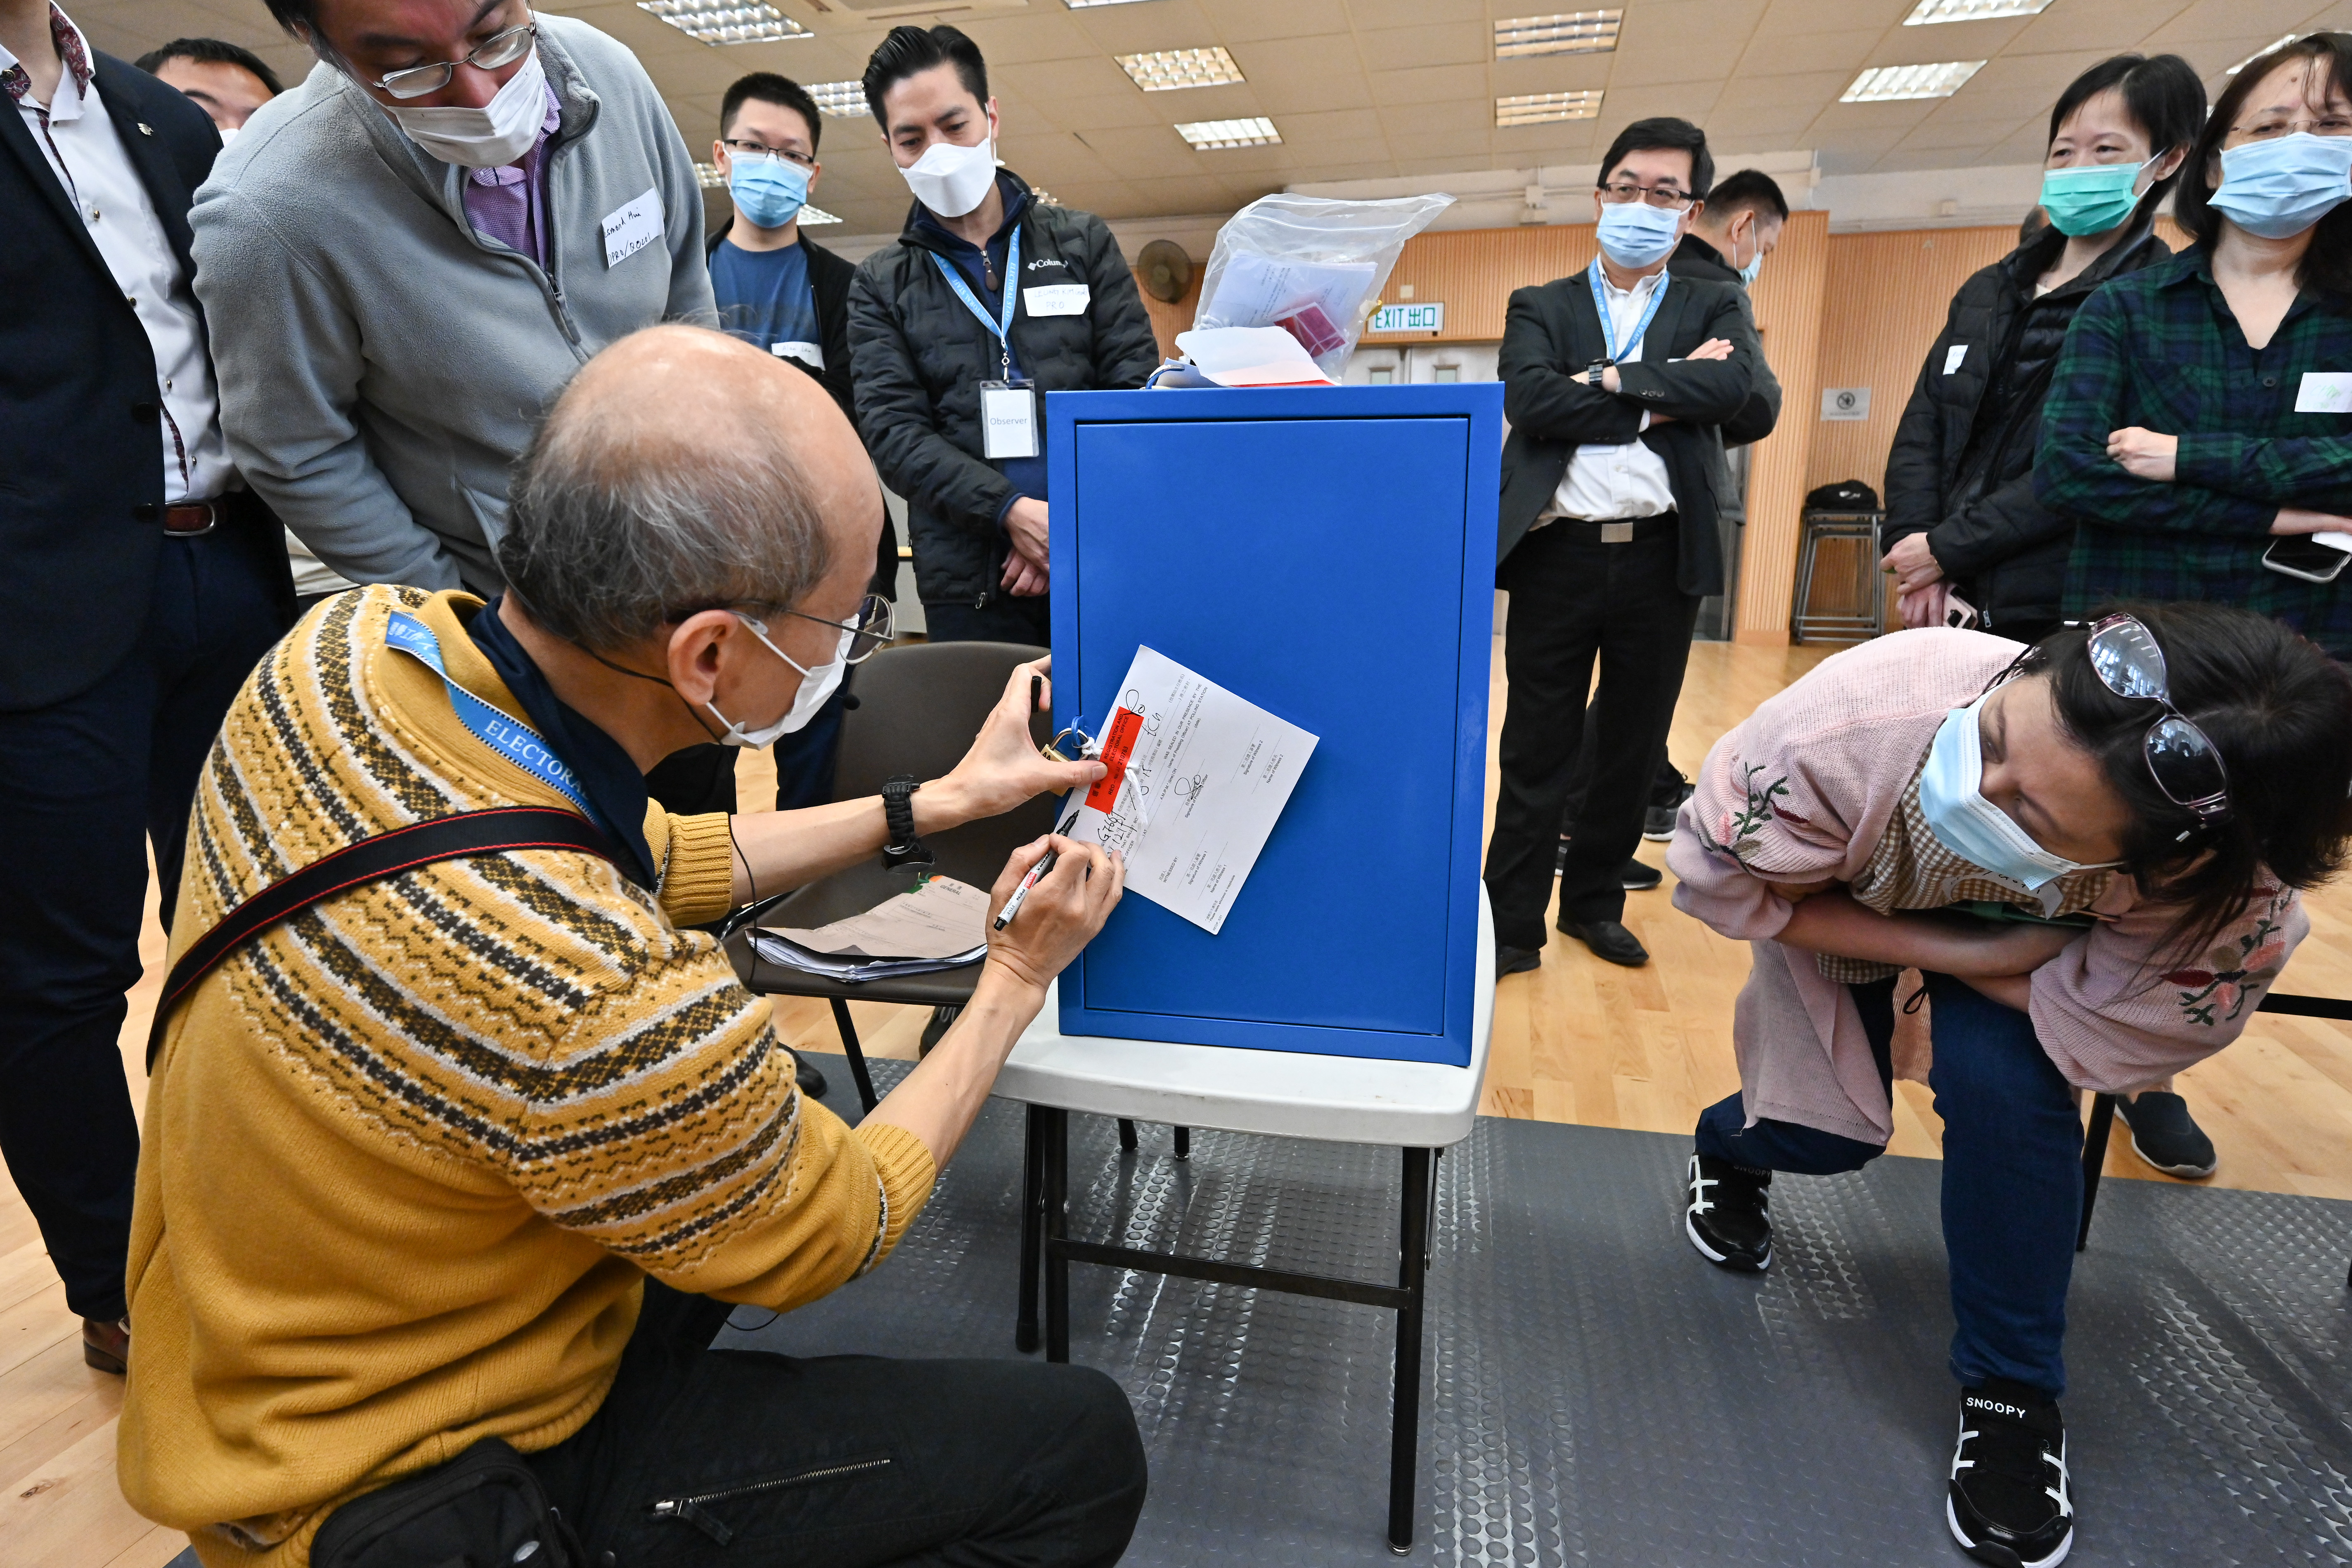 The 2021 Legislative Council General Election will be held on December 19. The Registration and Electoral Office (REO) arranged in the past two weeks training and practice sessions with simulated scenarios for staff who will work in polling, counting and central counting stations. Photo shows polling staff being briefed by a representative from the REO on the preparation work for opening polling stations.
